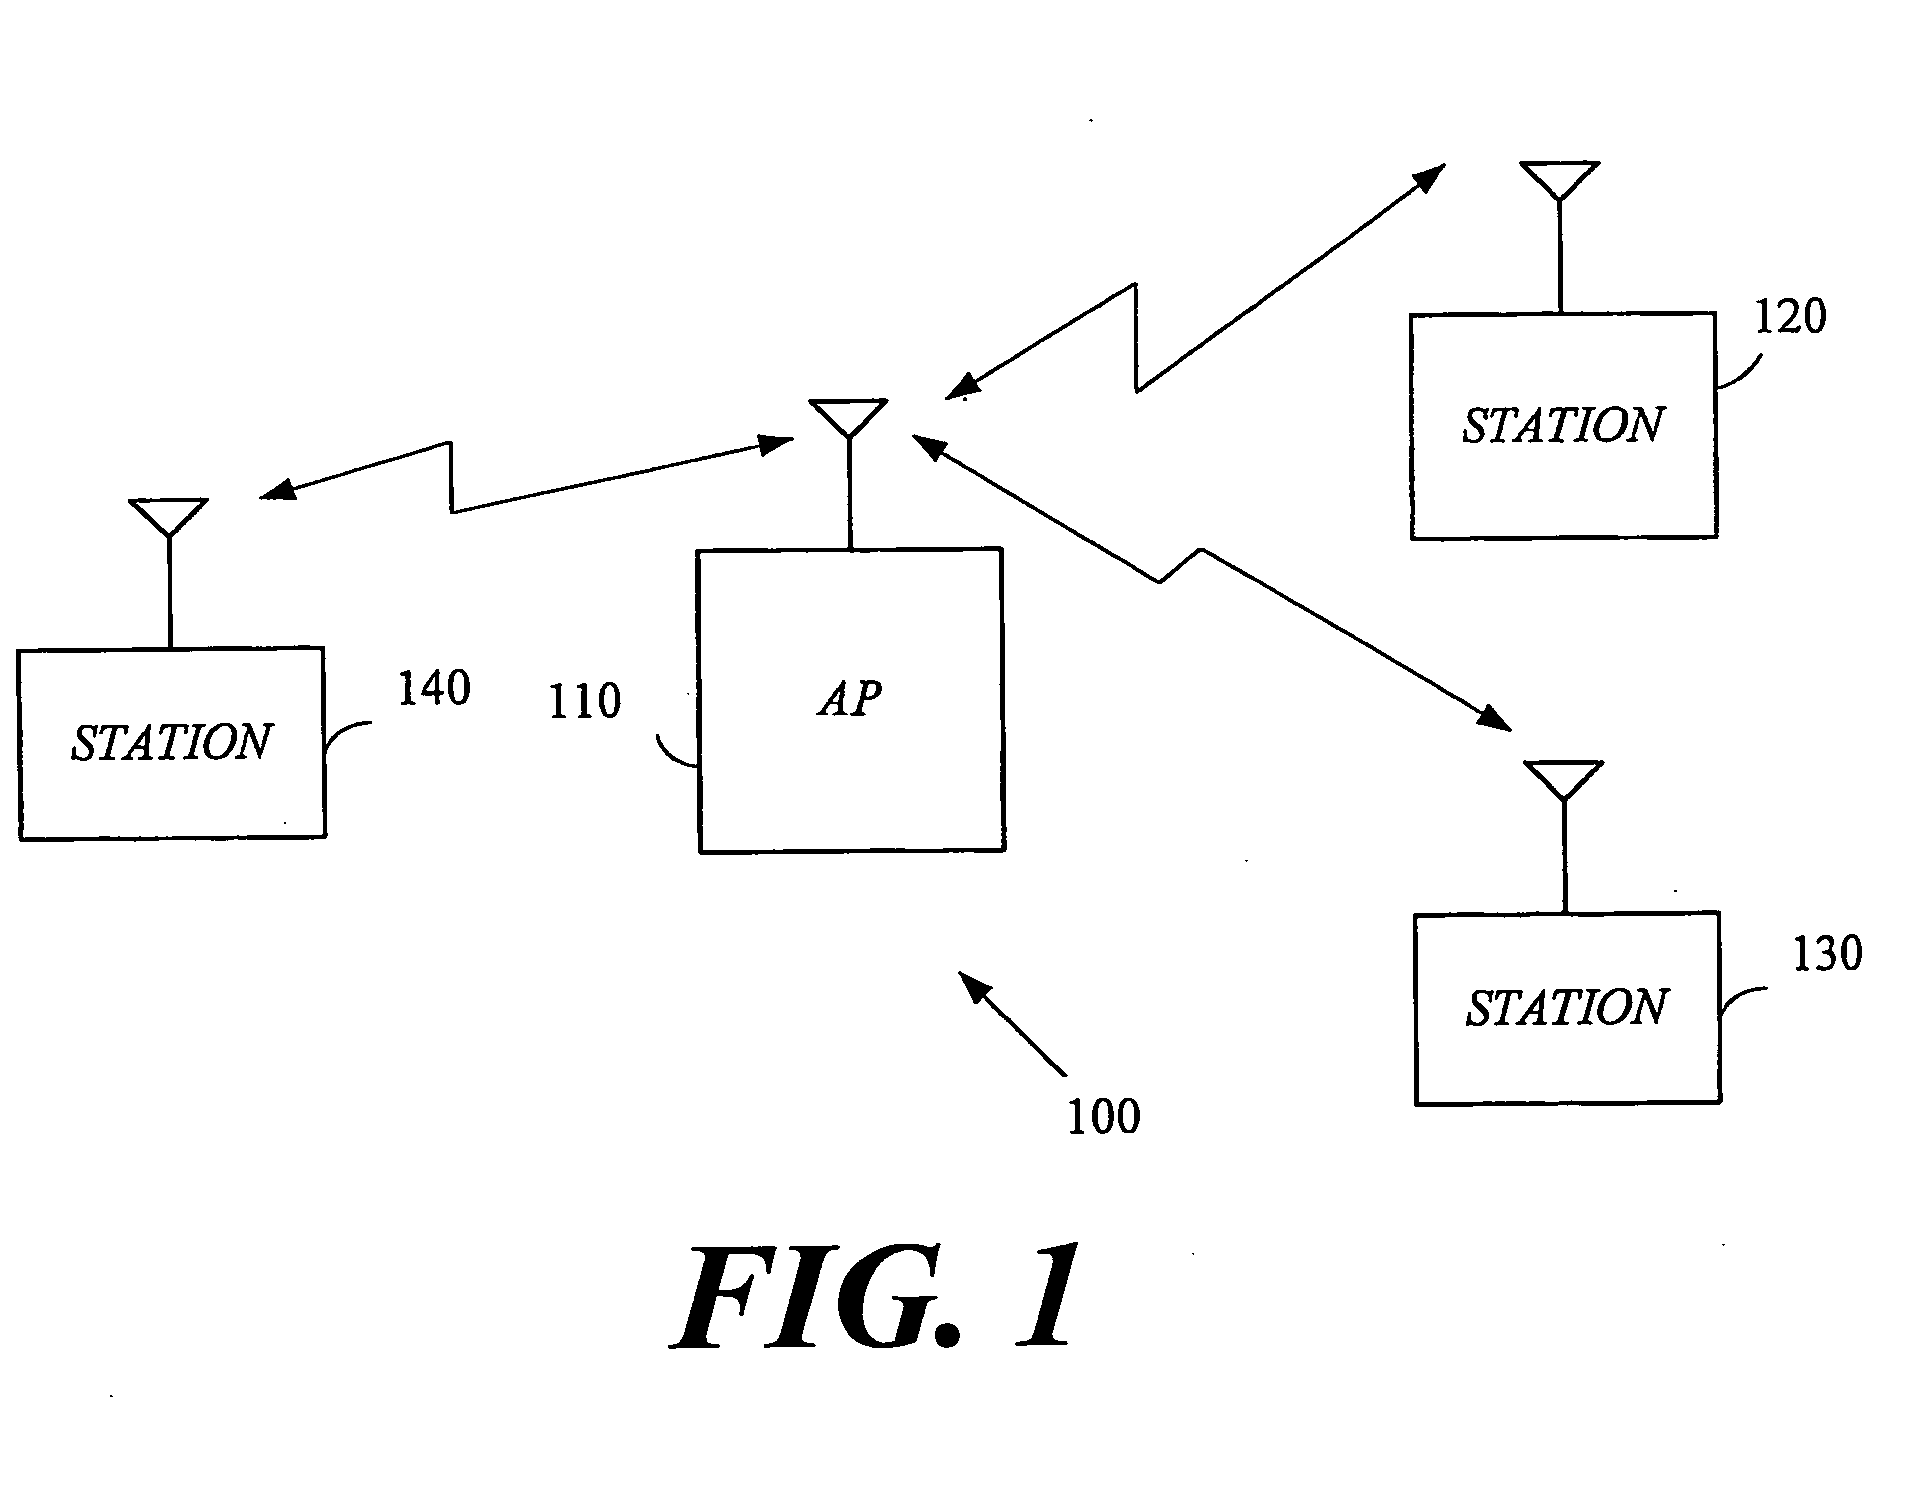 Method and apparatus to provide hidden node protection